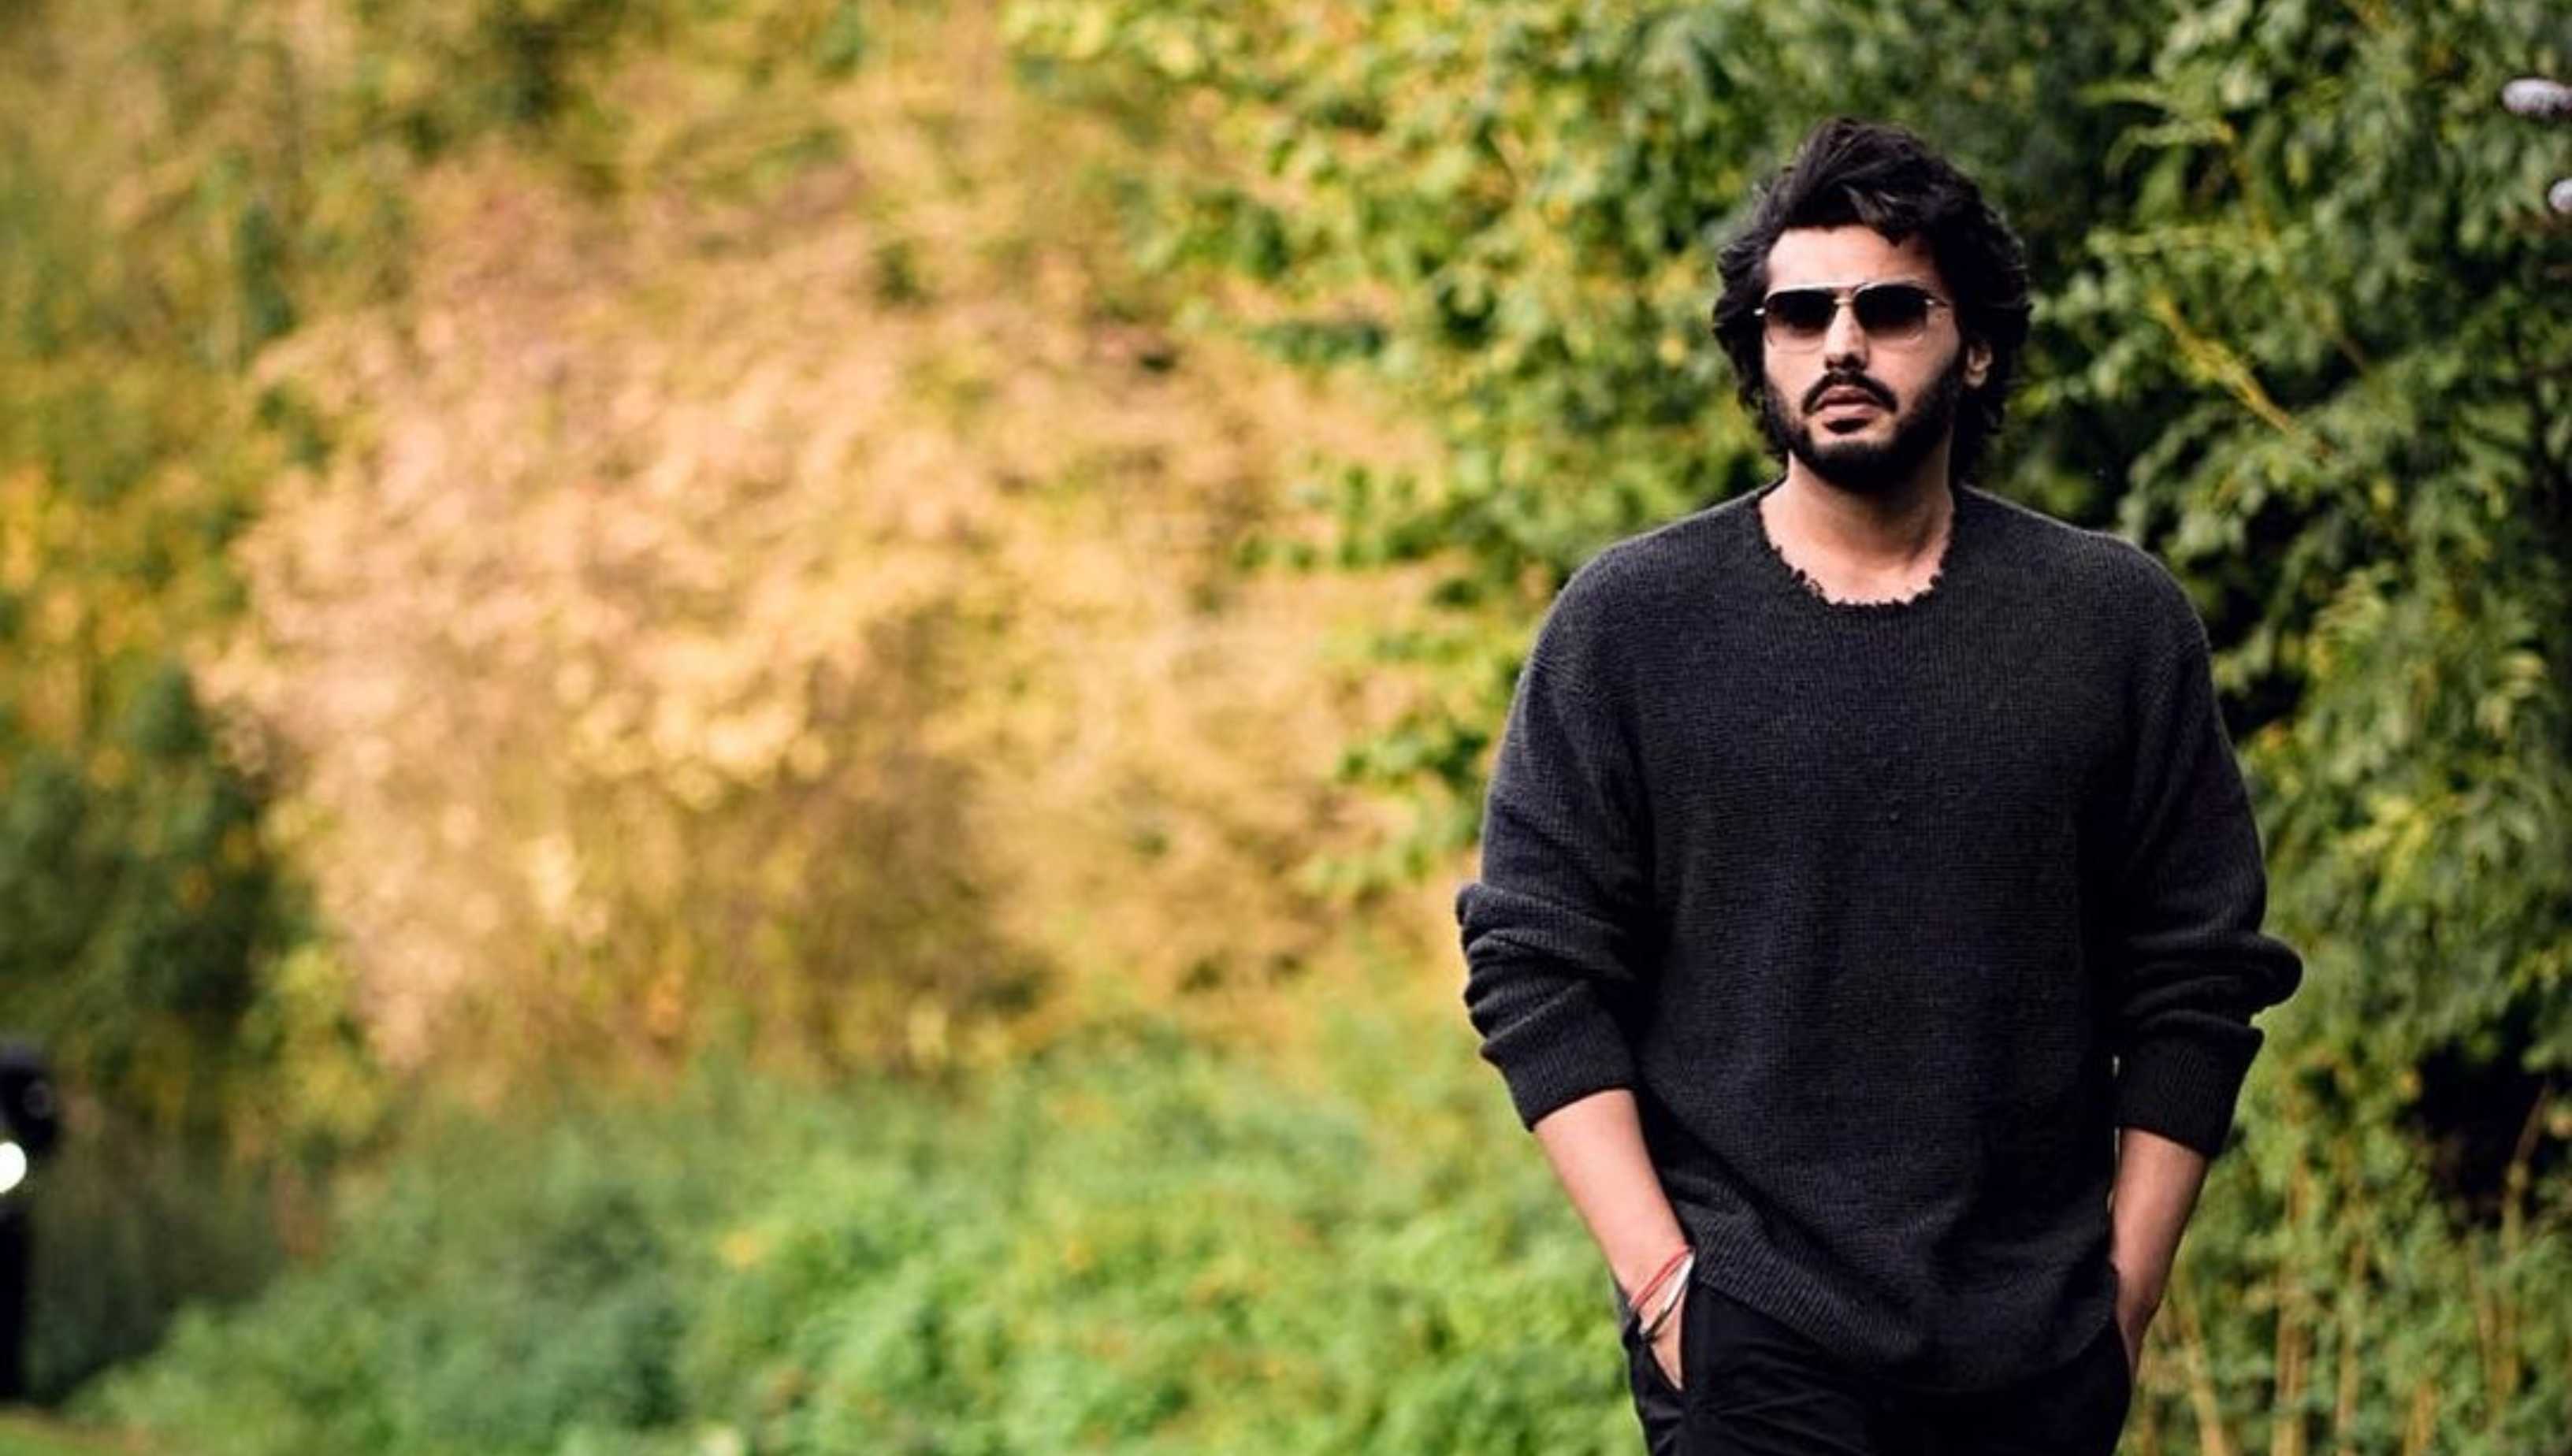 Arjun Kapoor to shoot the next schedule of his romantic comedy in Rishikesh and Delhi; here’s all we know